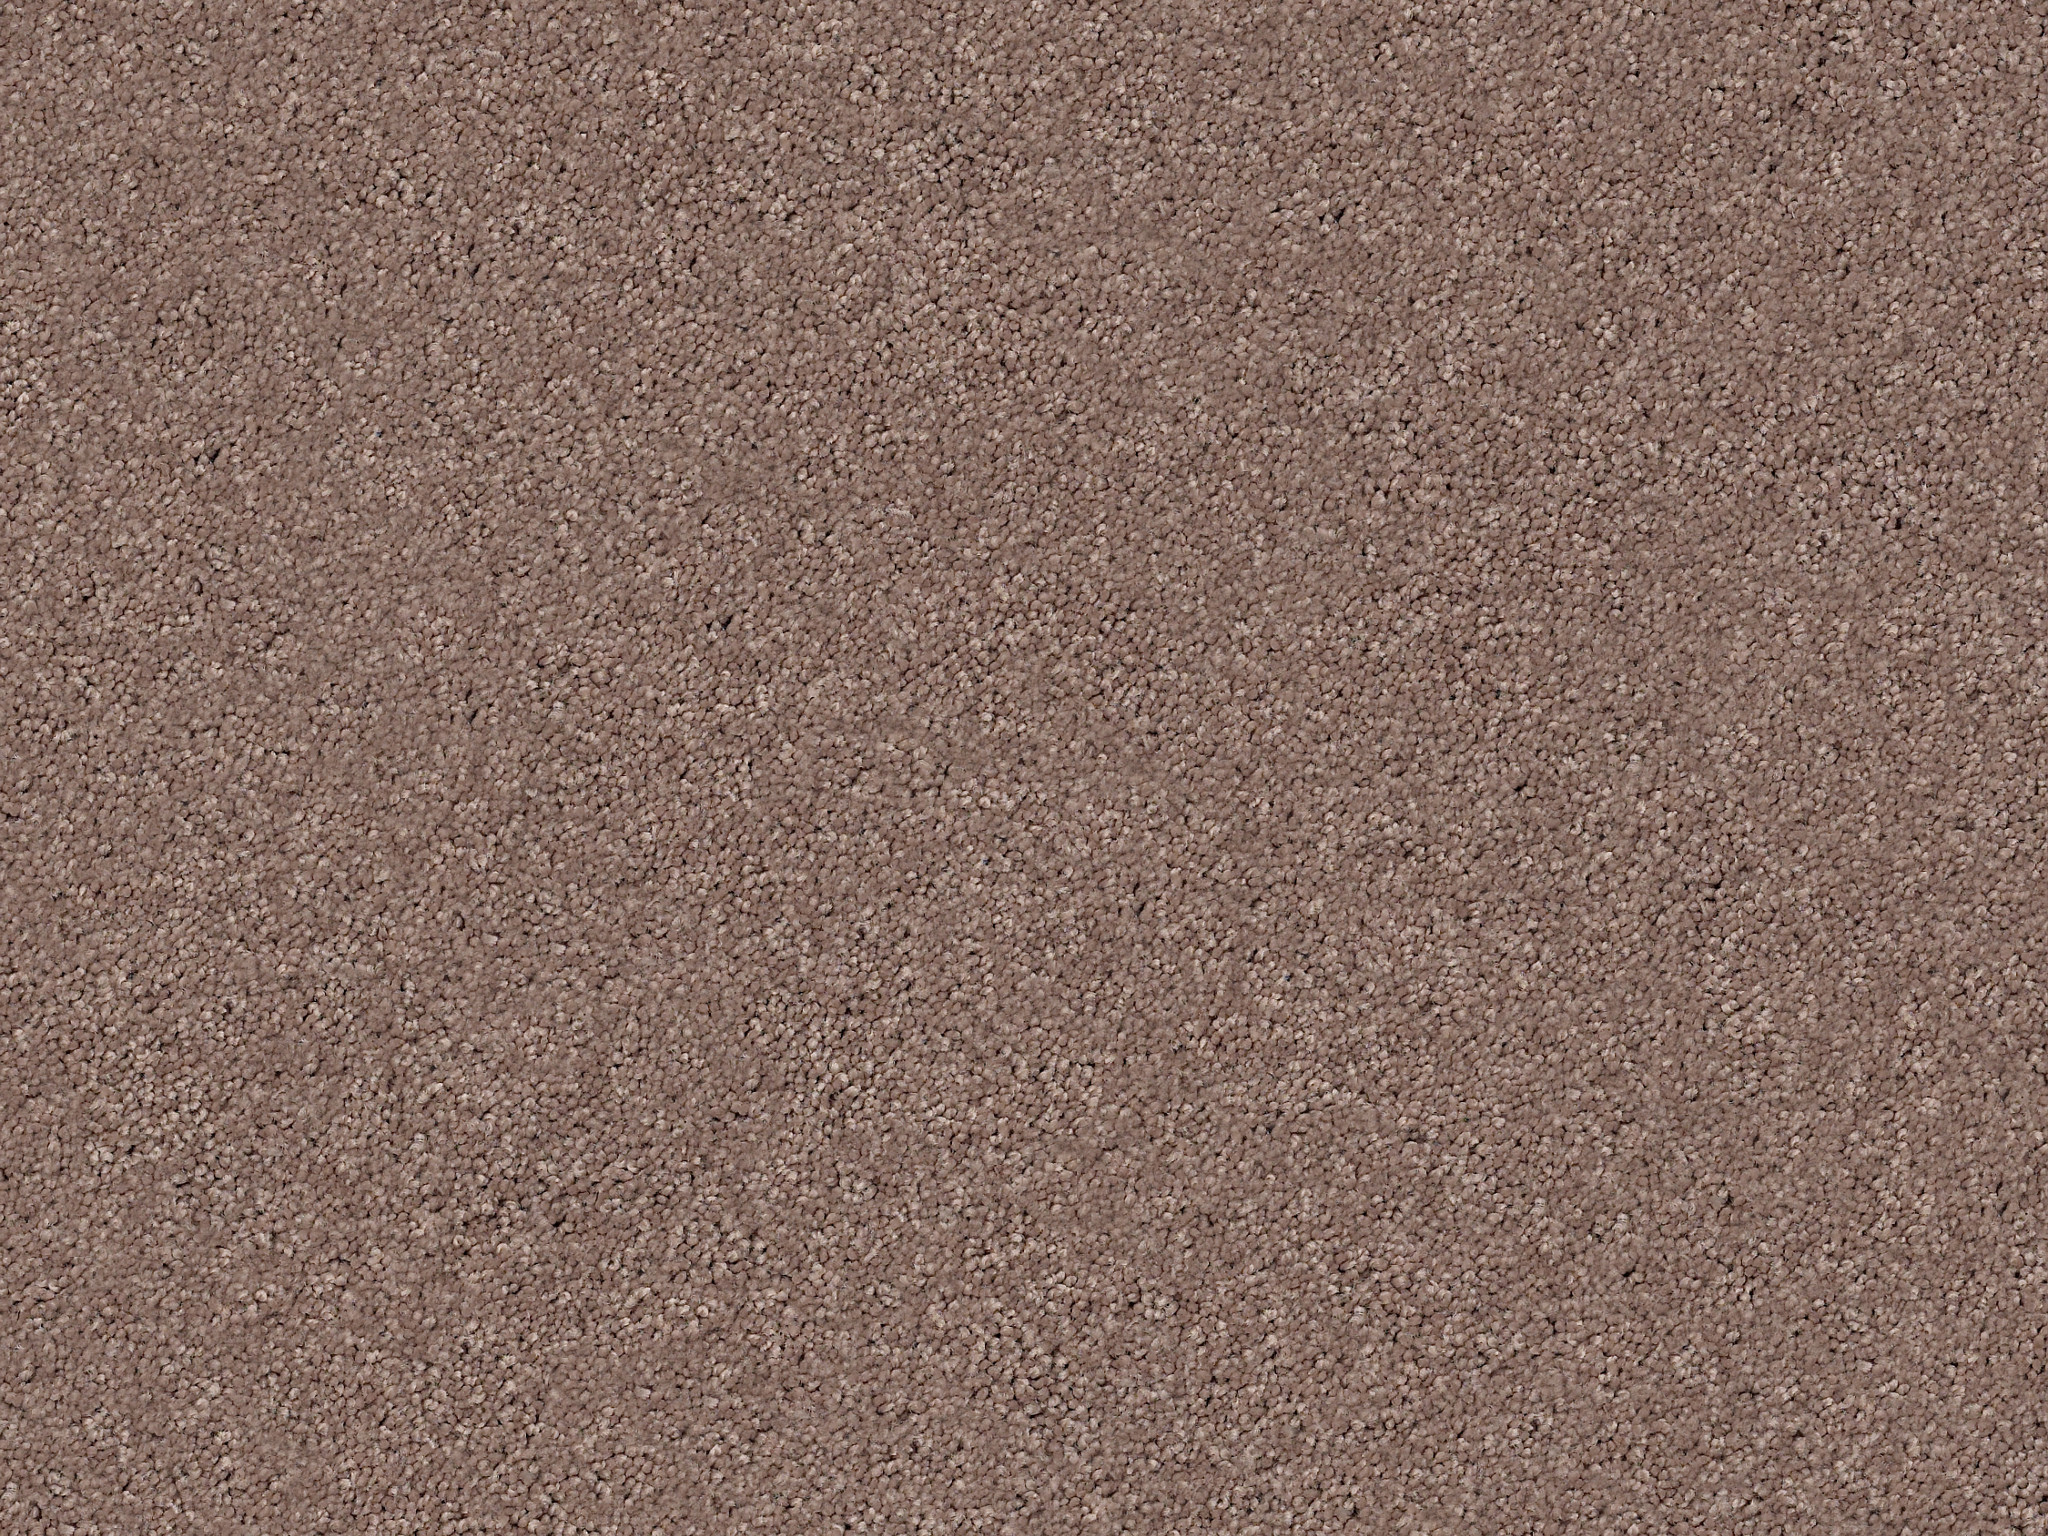 First Act Carpet - Enigma Zoomed Swatch Image